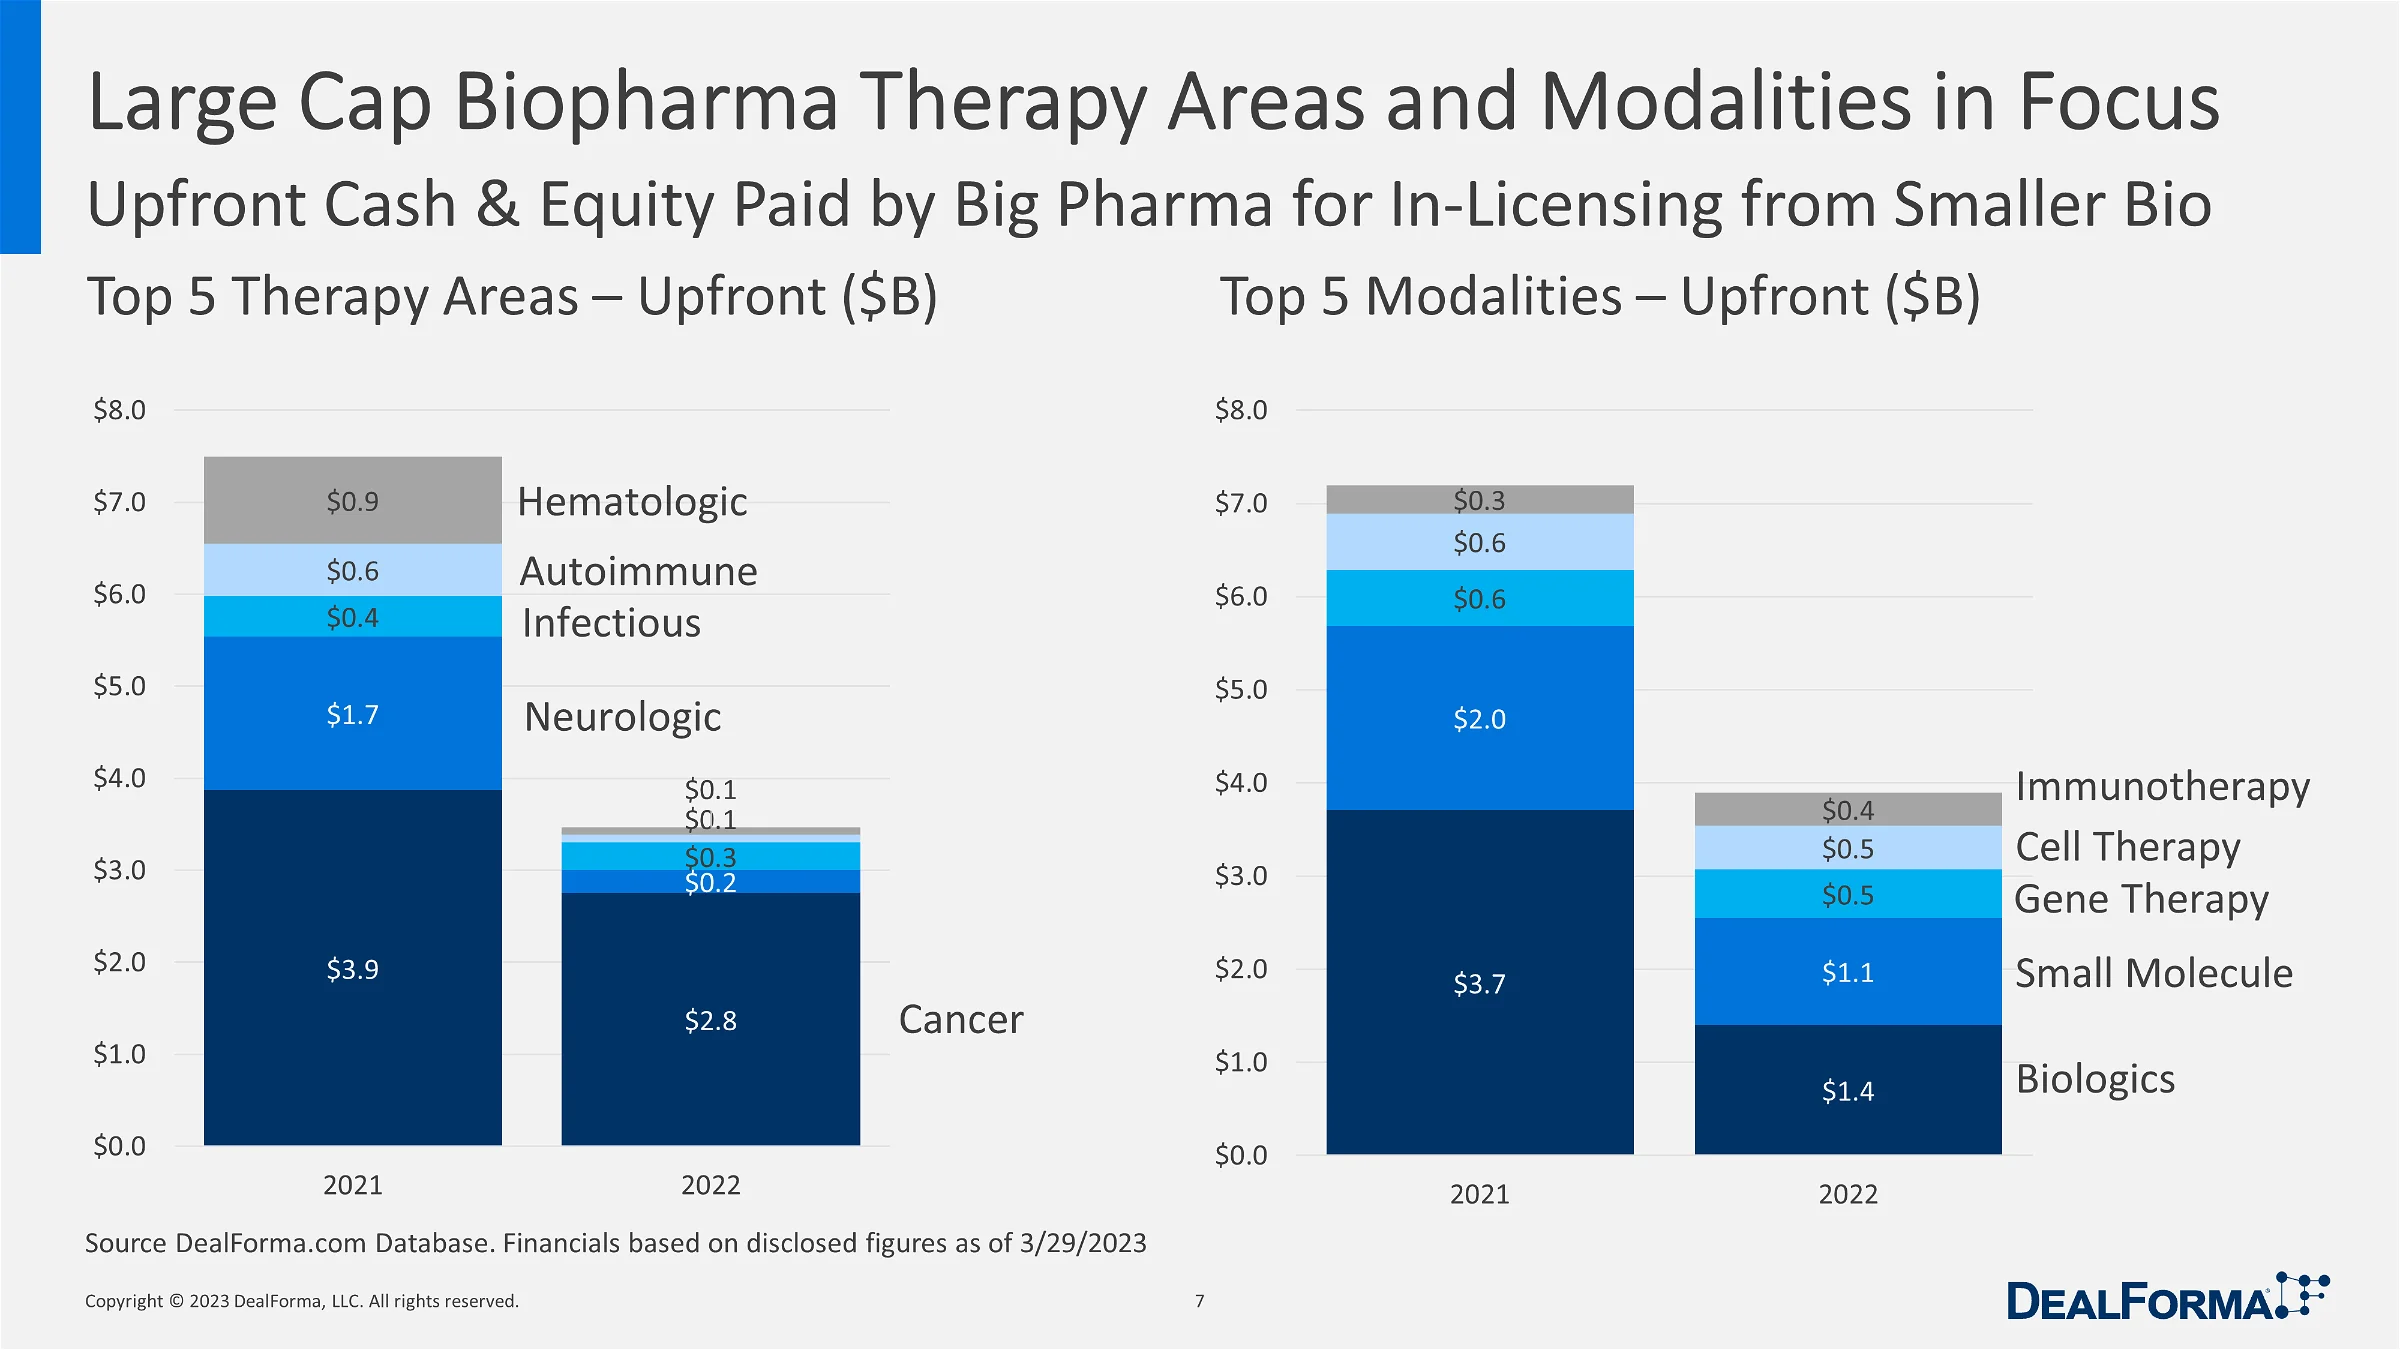 Large Cap Biopharma Therapy Areas and Modalities in Focus